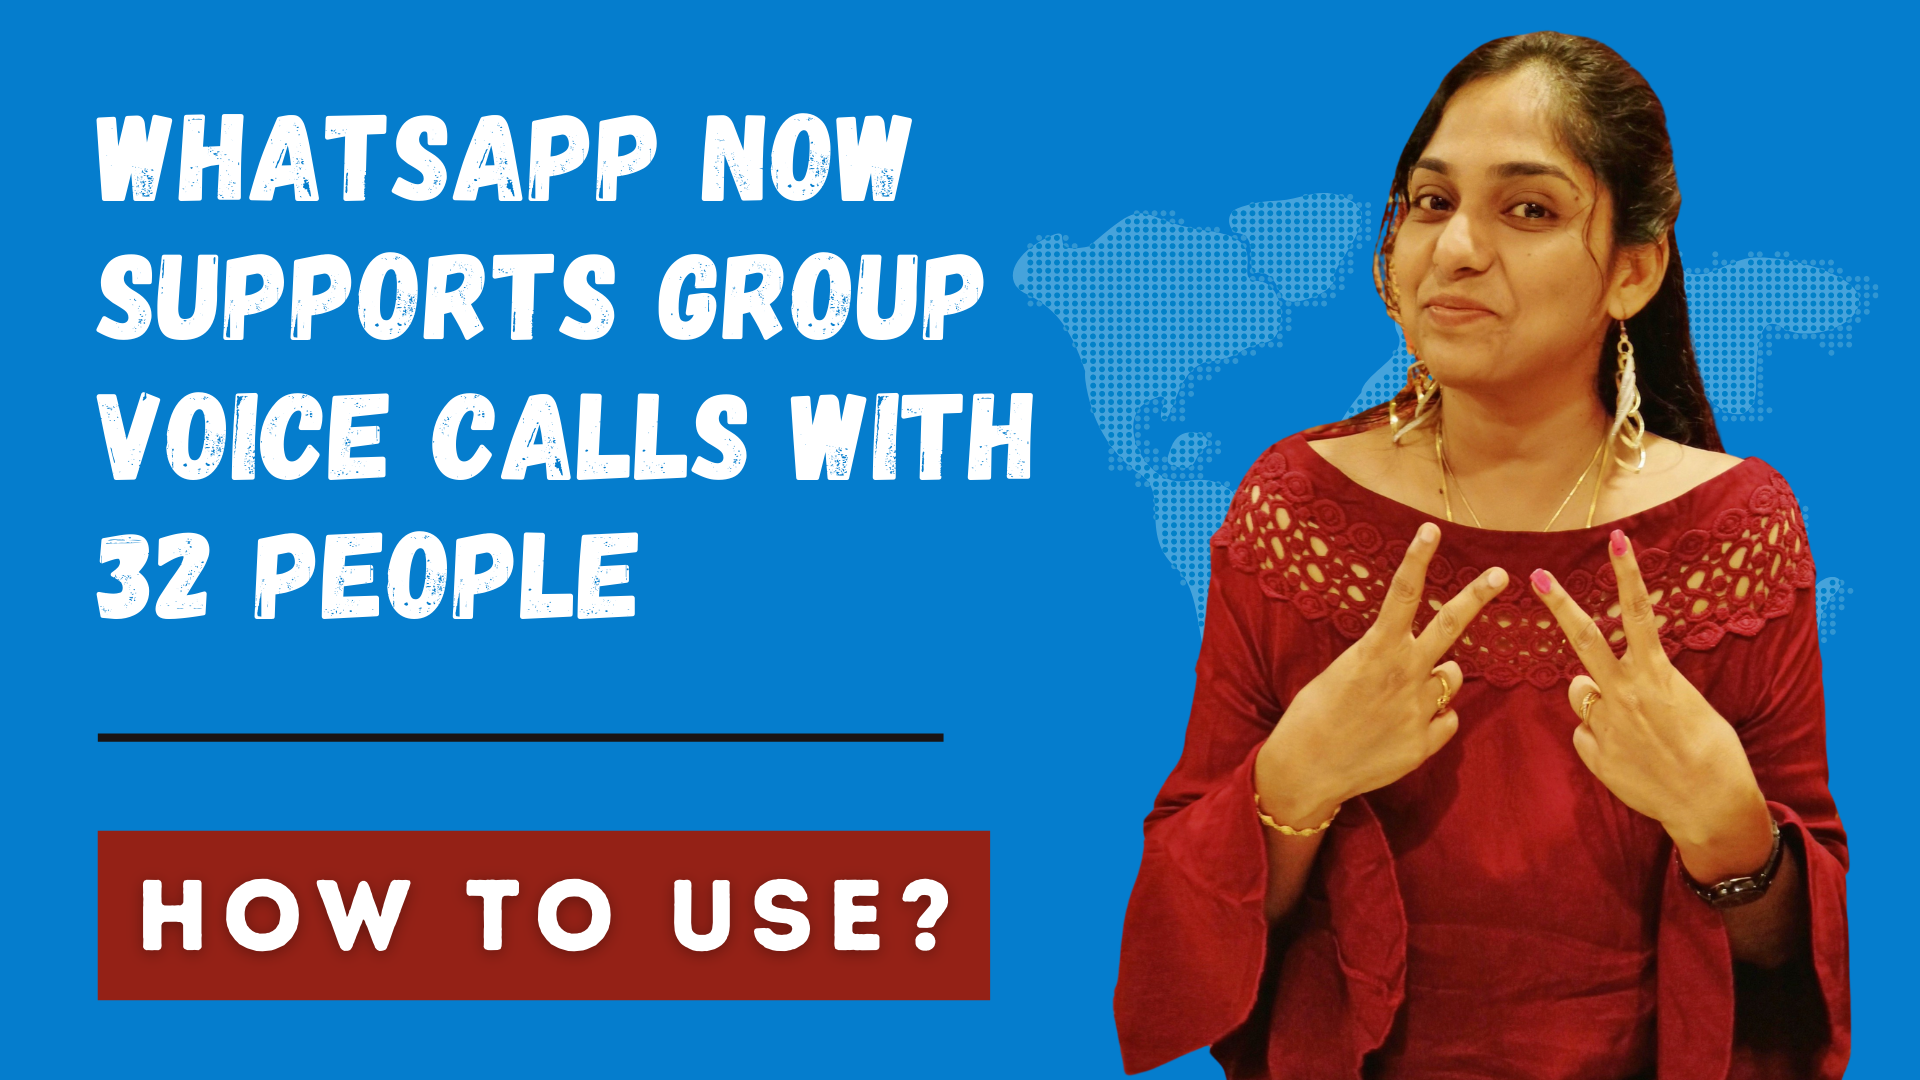 WhatsApp Now Supports Group Voice Calls With 32 People | How To Make A Call Or Add Participants?